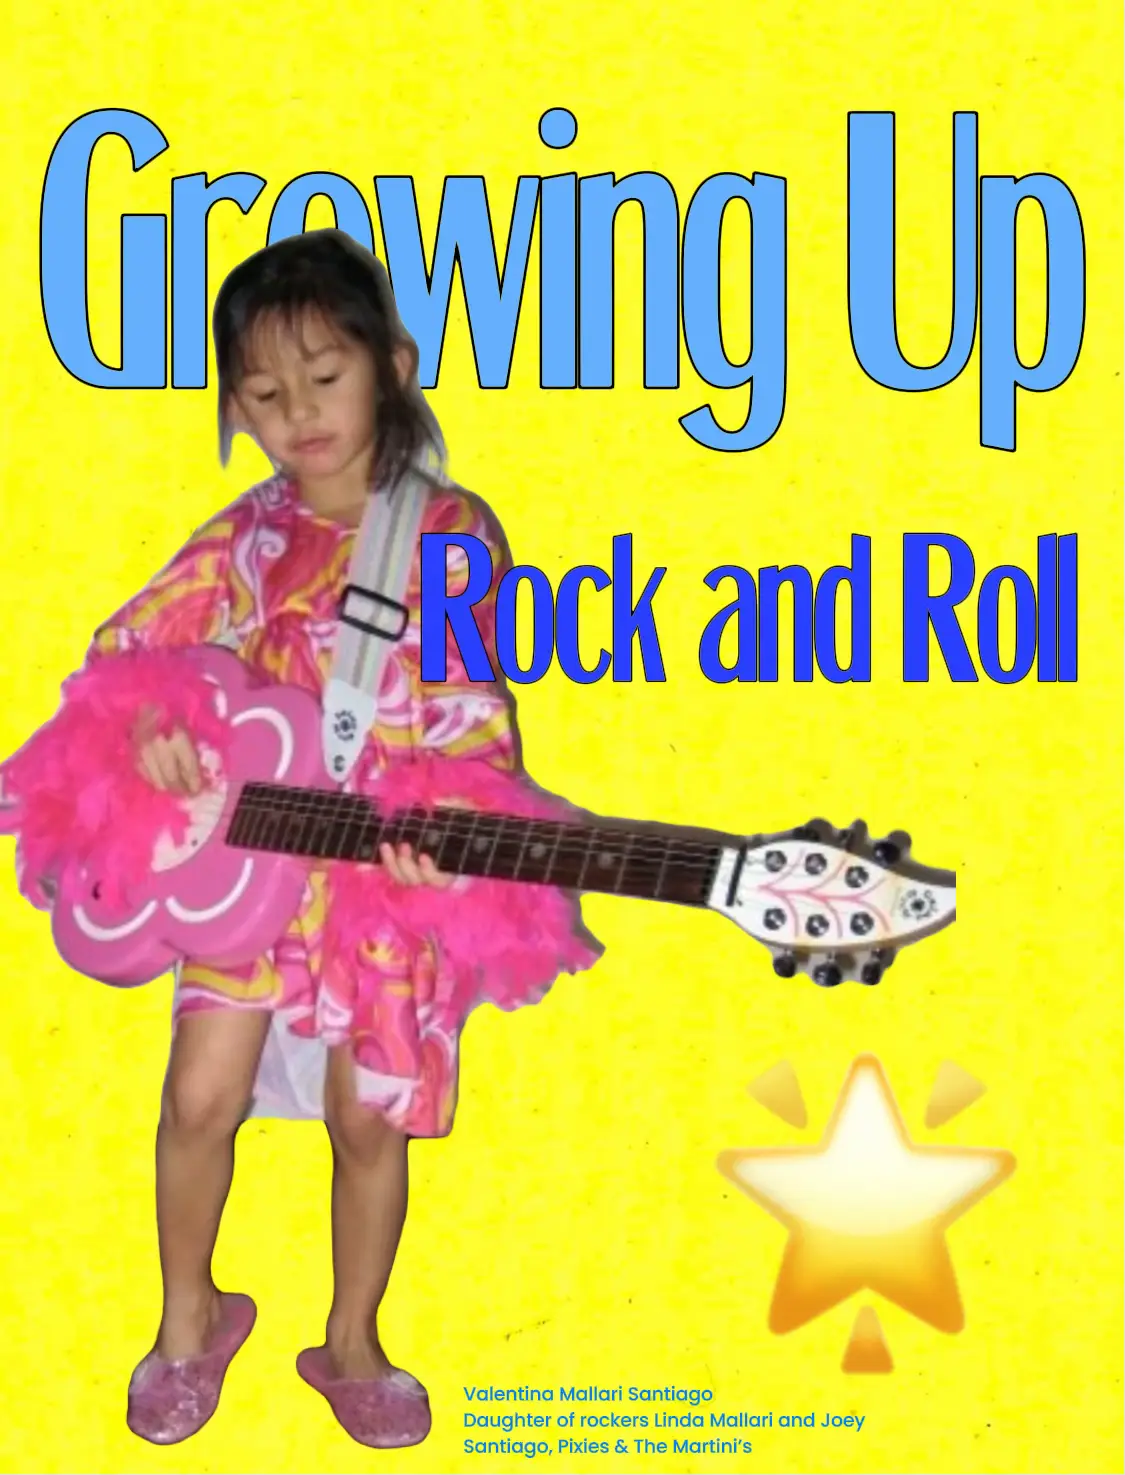  A little girl is playing the guitar in a picture.